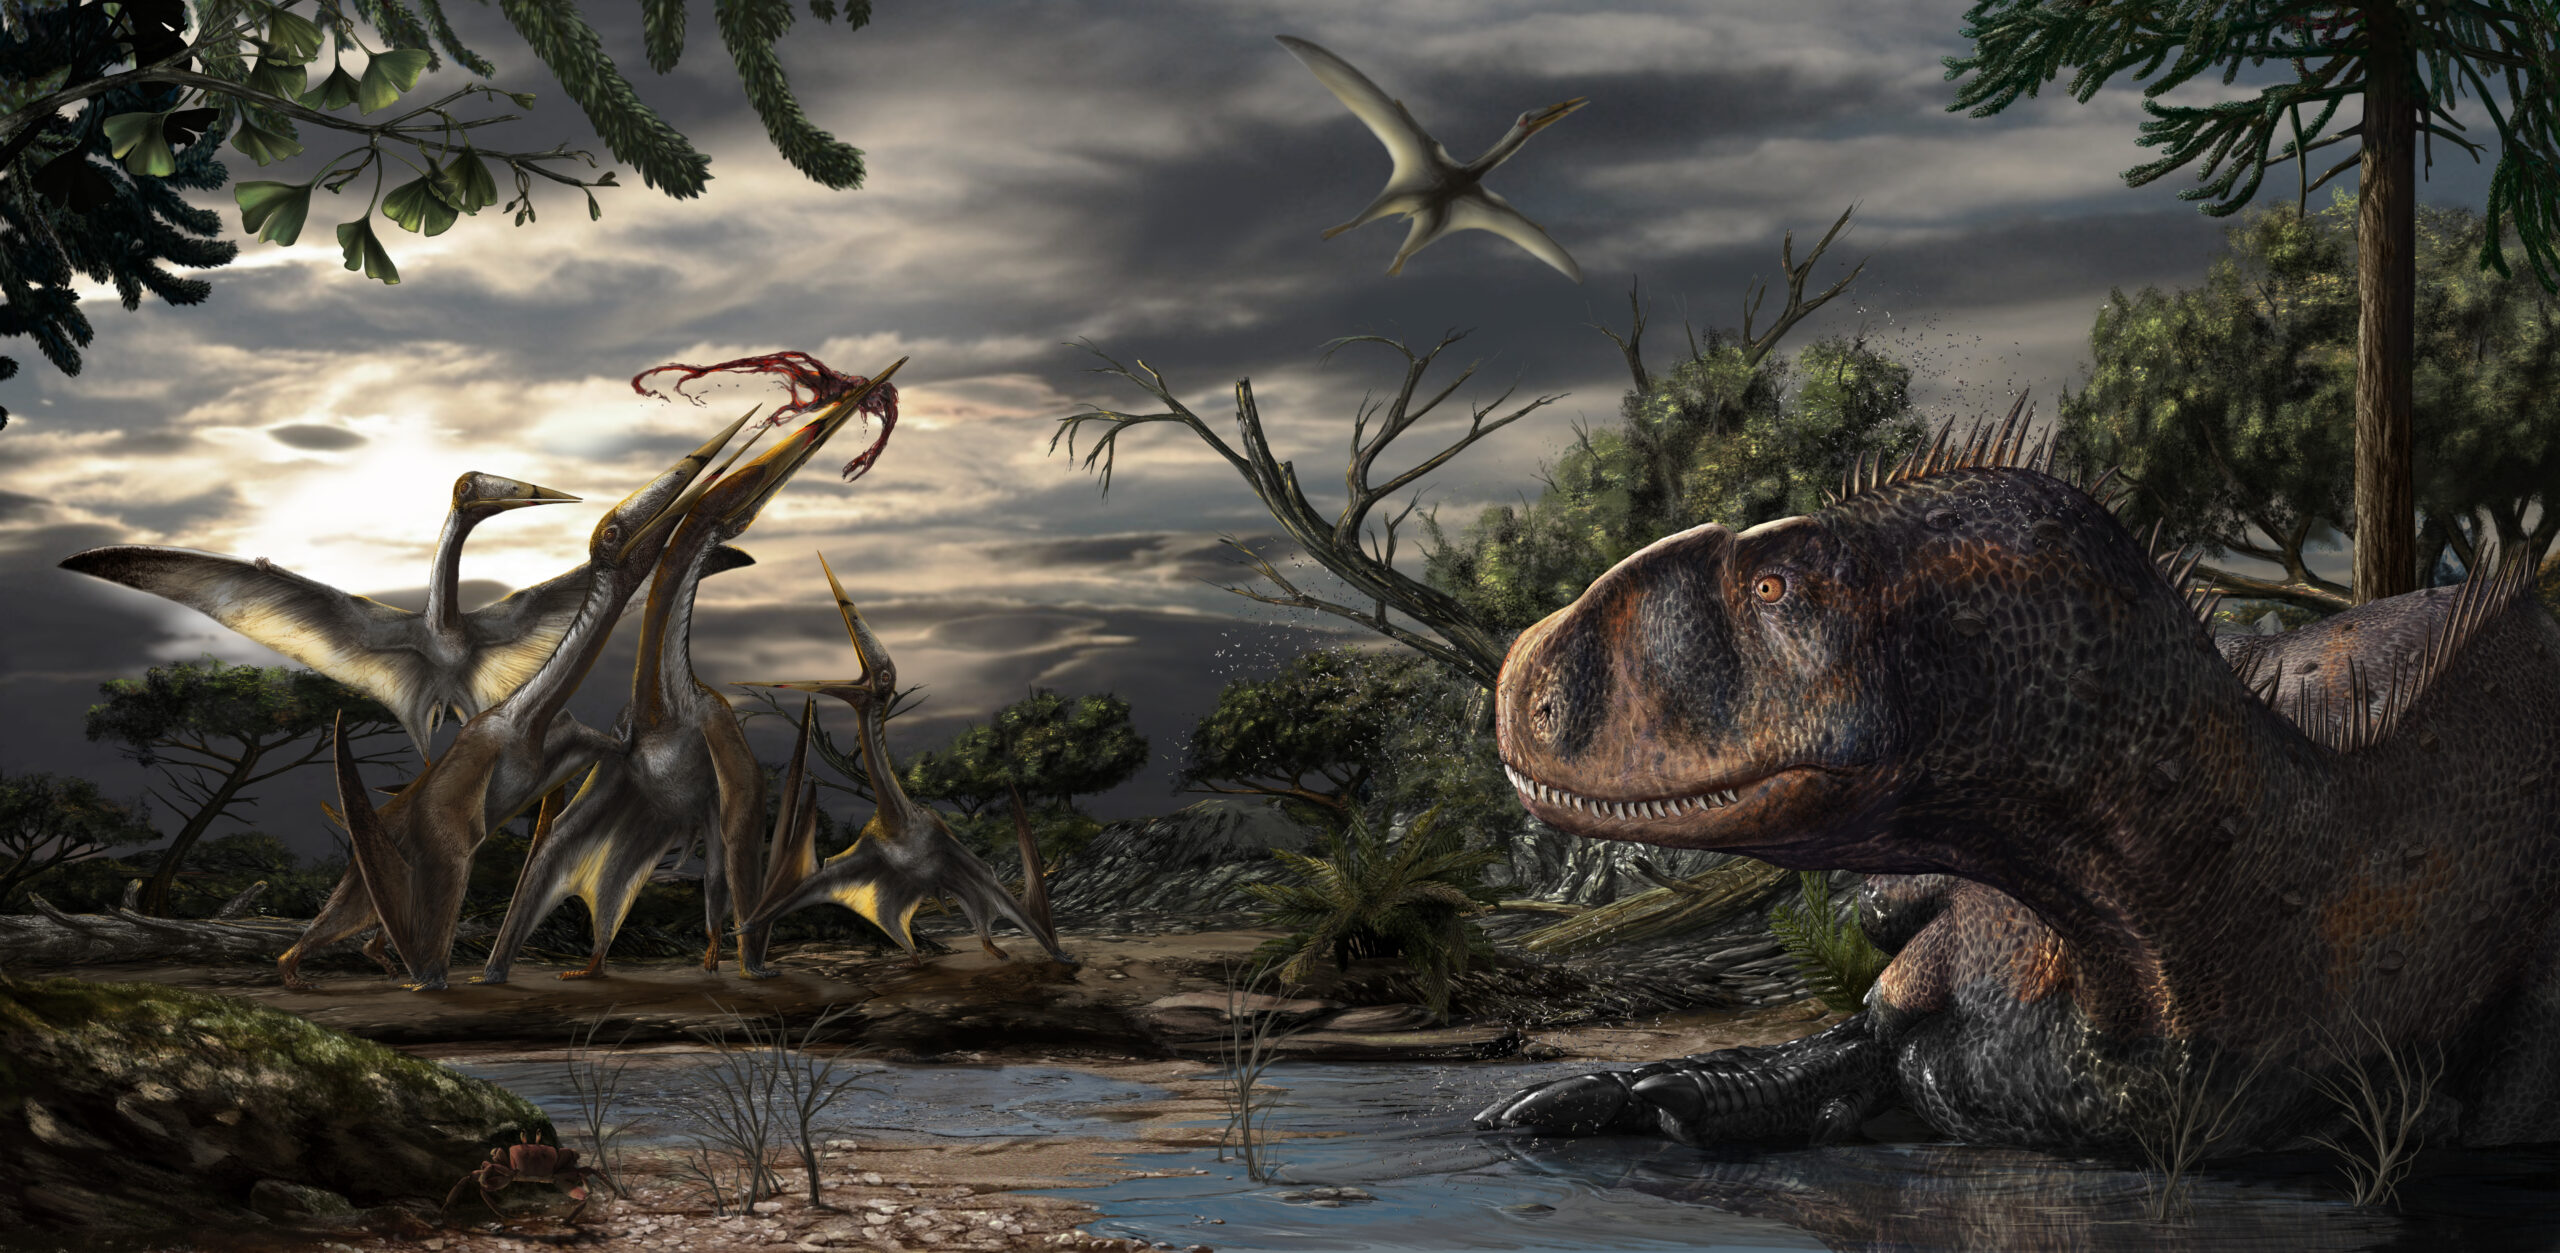 The Sahara Desert was once flooded with history’s most vicious dinosaurs